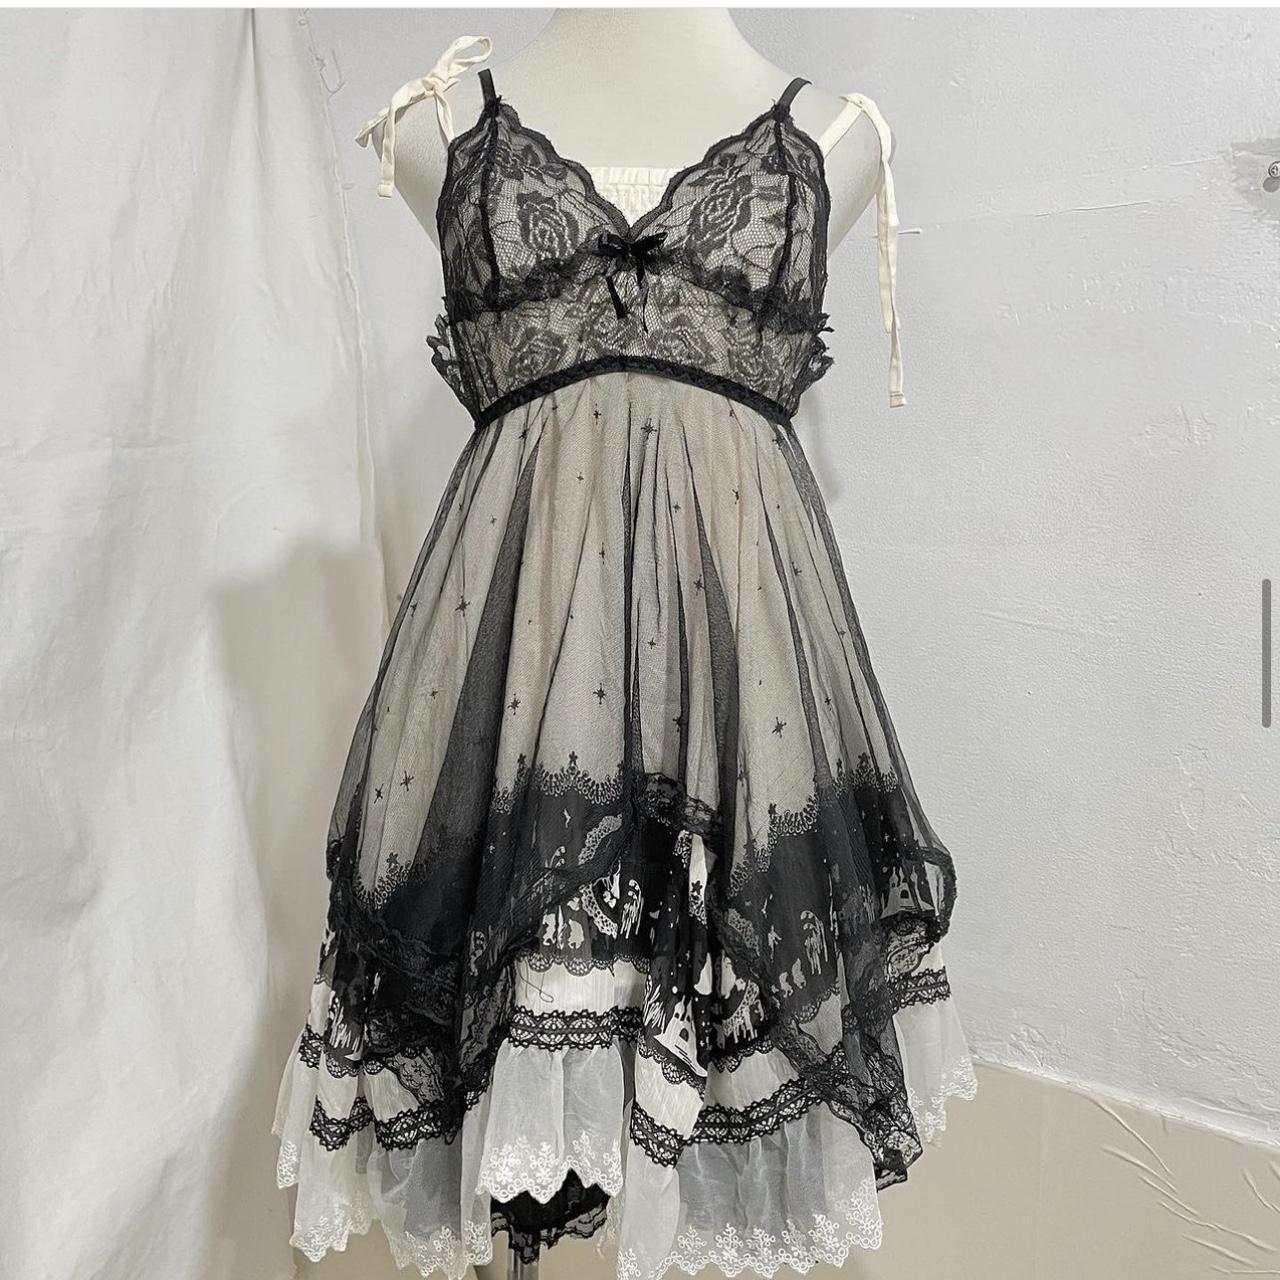 Sheer lace Cami Tank Lingerie Dress with Tiny Bow, - Depop